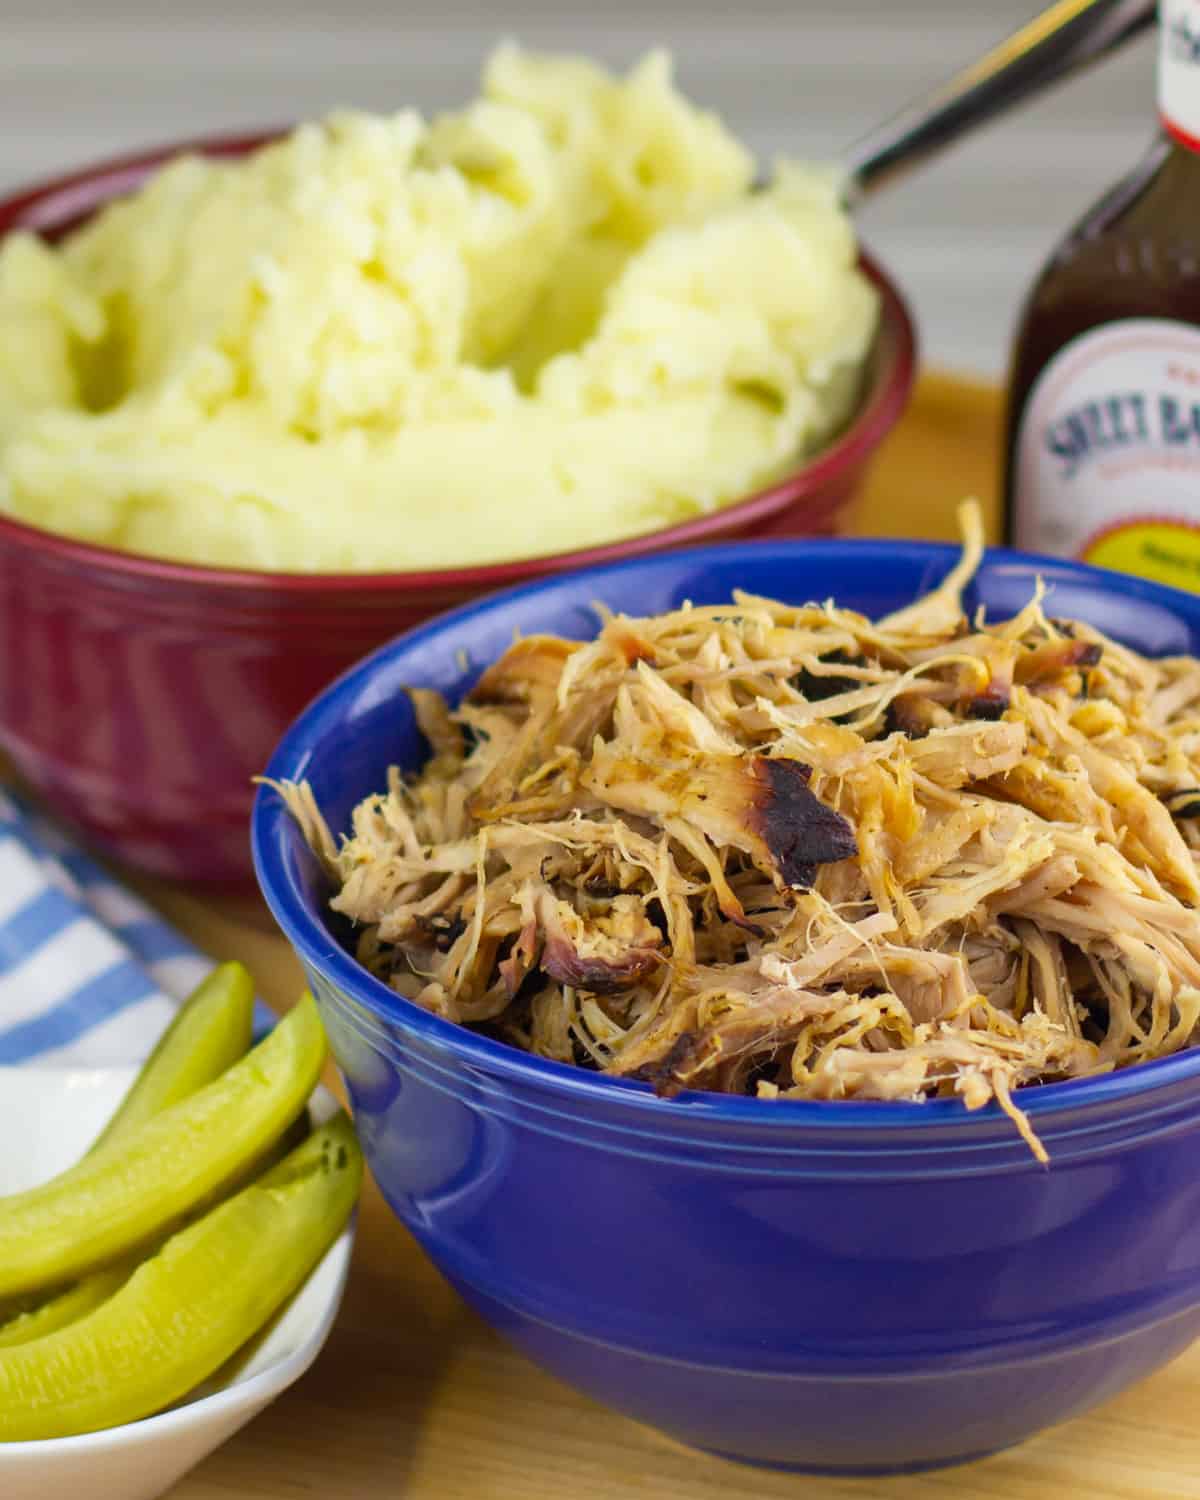 Two bowls with mashed potatoes and shredded pork.